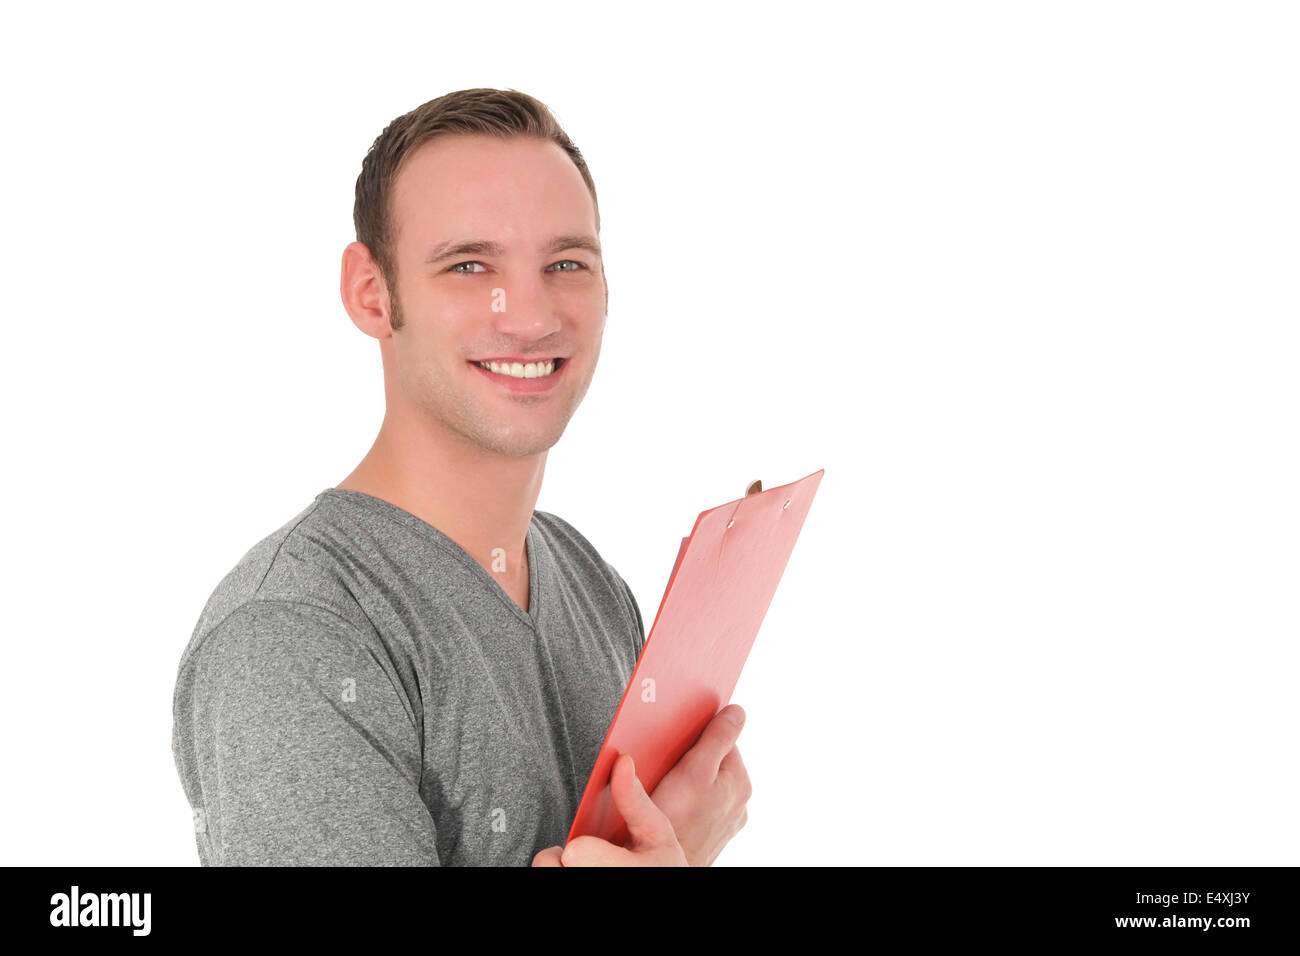 Handsome smiling man holding a clipboard Stock Photo